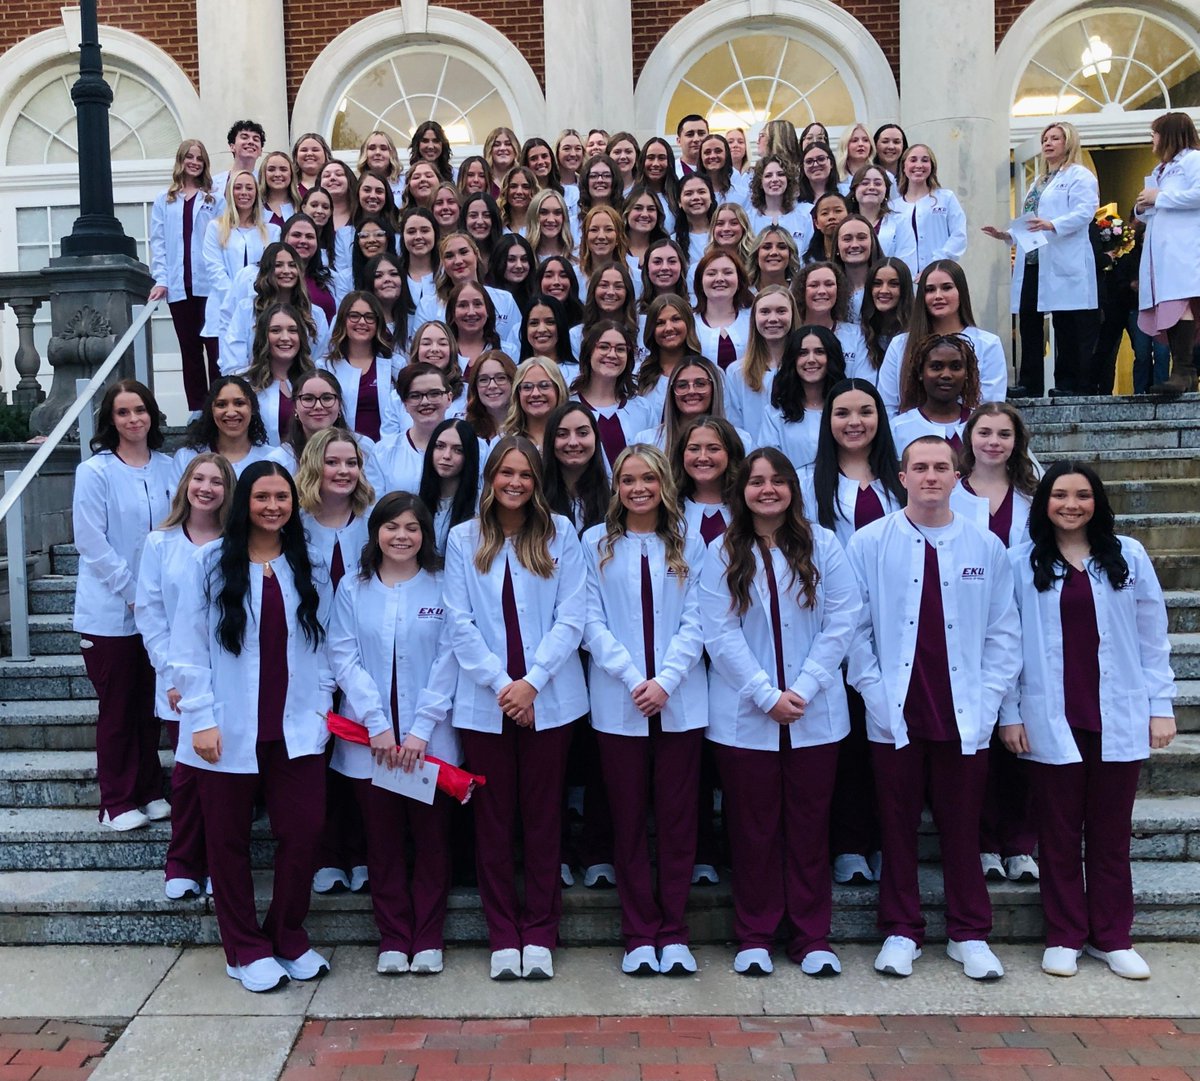 At #EKU’s Nursing lab, students get hands-on learning with state-of-the-art equipment. Just ask these recent white coat recipients! You can read more about the innovative education our nursing students receive in the link below 👇🩺🧑‍⚕️ 🔗: stories.eku.edu/events/eku-nur…